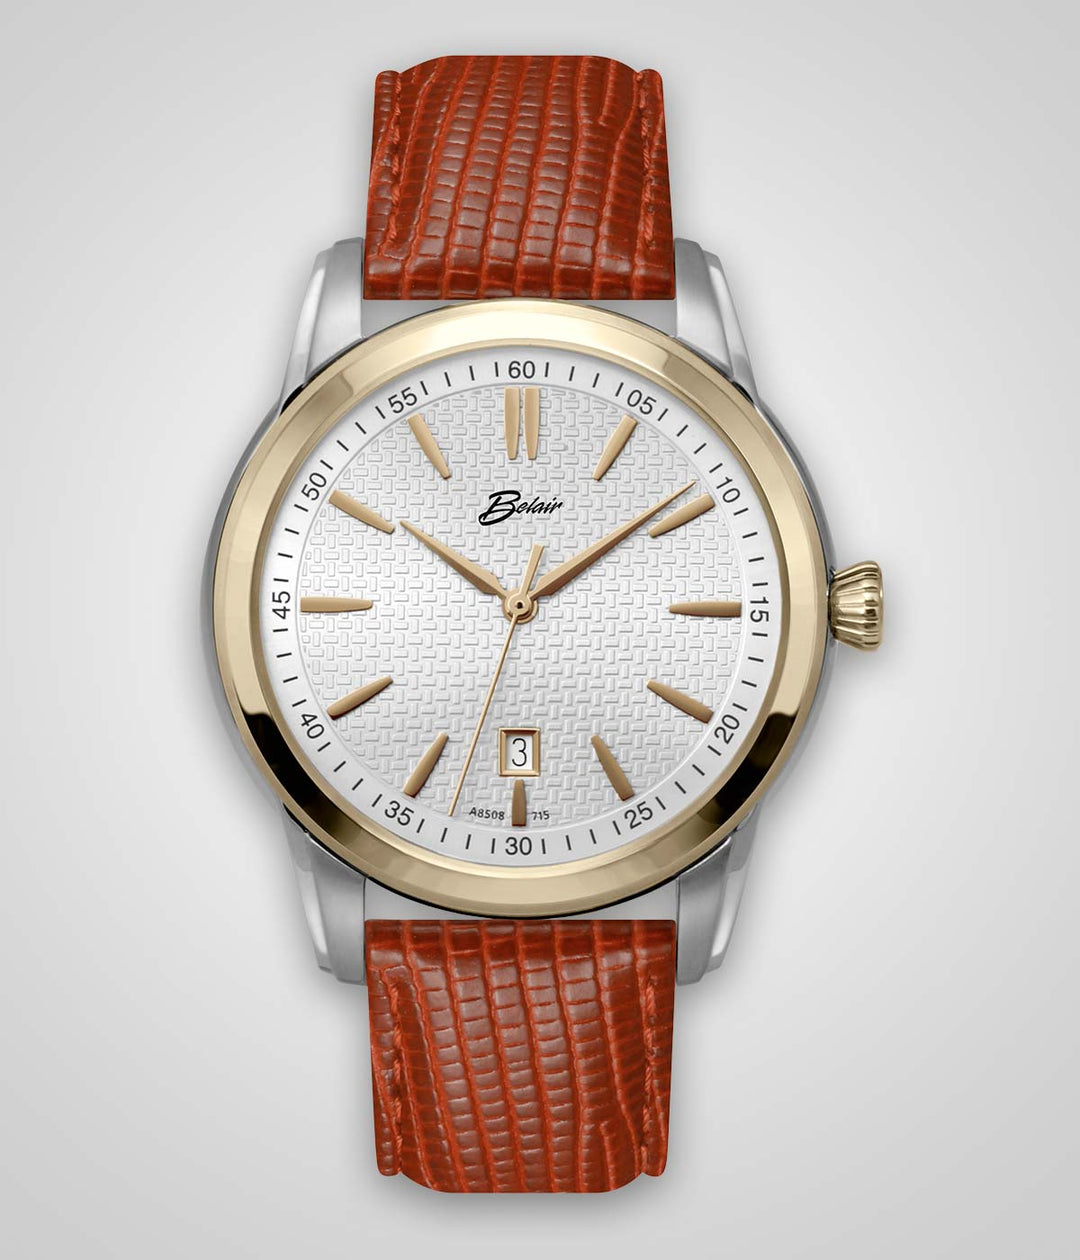 Belair Men's Watch with Genuine Leather Strap